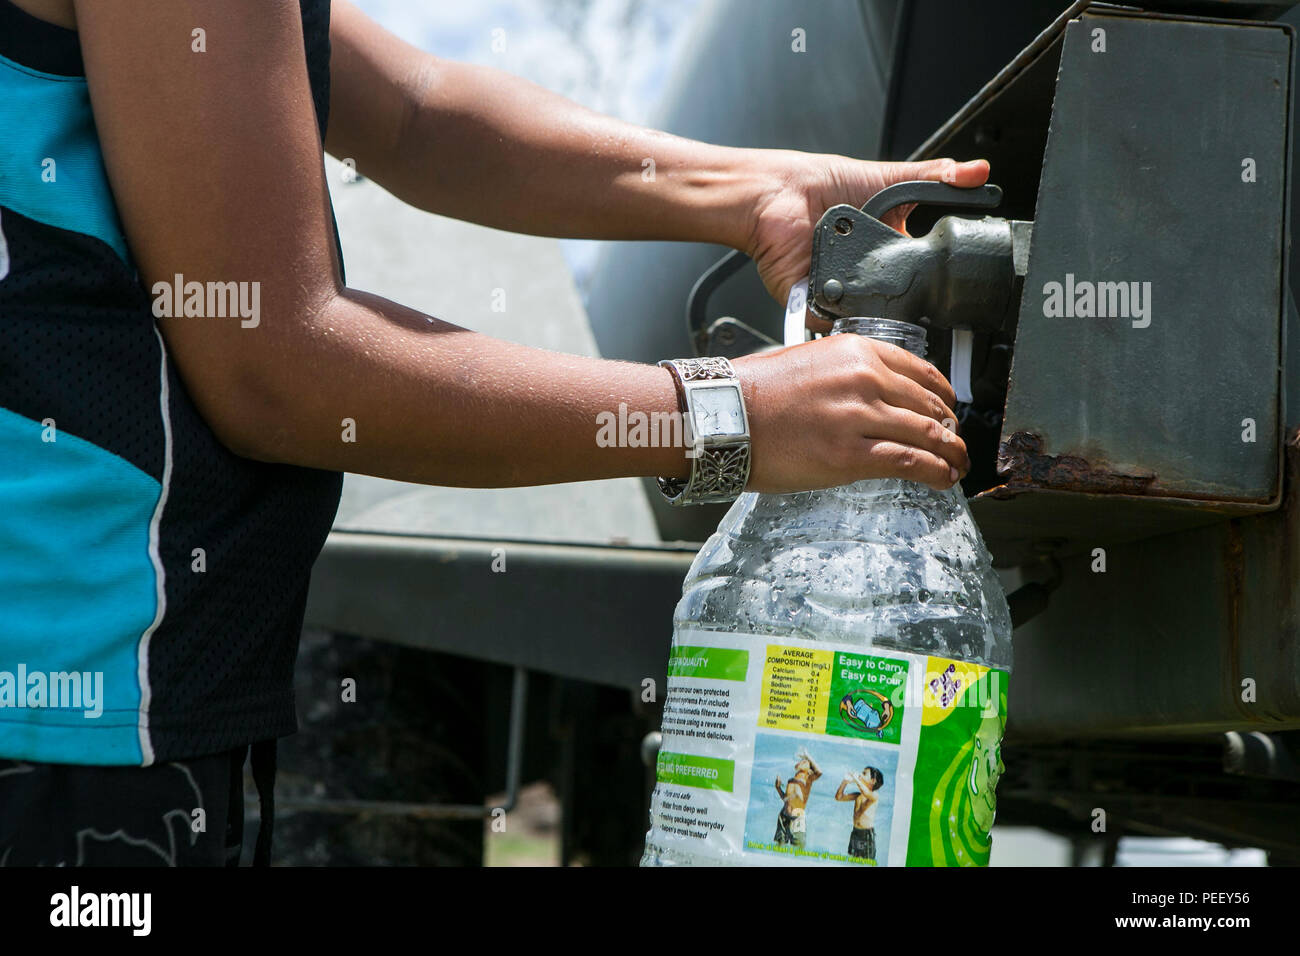 A local boy fills a water jug at a water distribution site set up by U.S. Marines with Combat Logistics Battalion 31, 31st Marine Expeditionary Unit, as part of typhoon relief efforts in Saipan, Aug. 12, 2015. The 31st MEU and the ships of the Bonhomme Richard Amphibious Ready Group are assisting the Federal Emergency Management Agency with distributing emergency relief supplies to Saipan after the island was struck by Typhoon Soudelor Aug. 2-3. (U.S. Marine Corps photo by Lance Cpl. Brian Bekkala/Released) Stock Photo